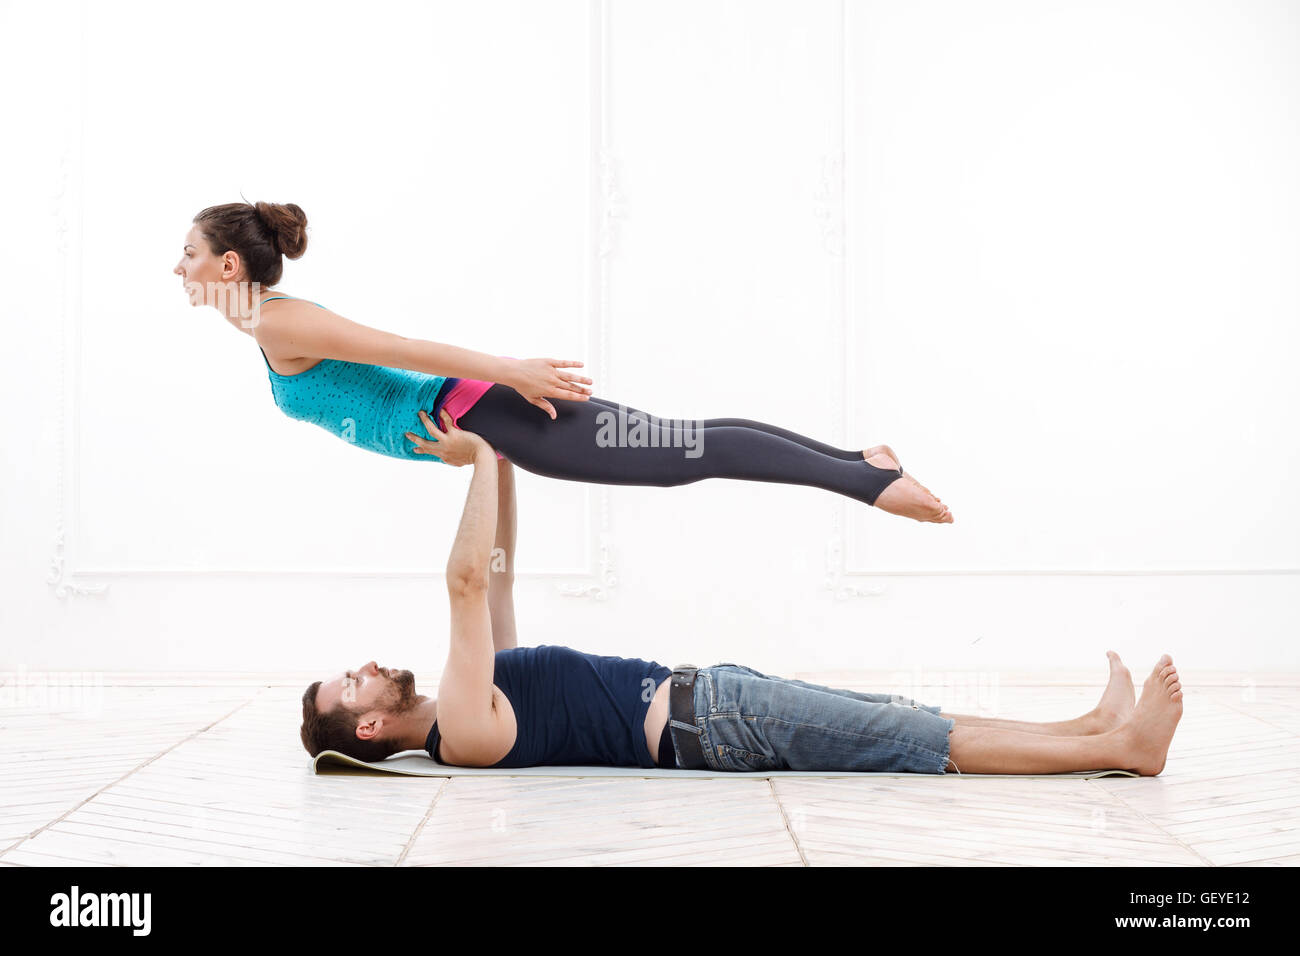 Four-Person Yoga Poses For All Levels